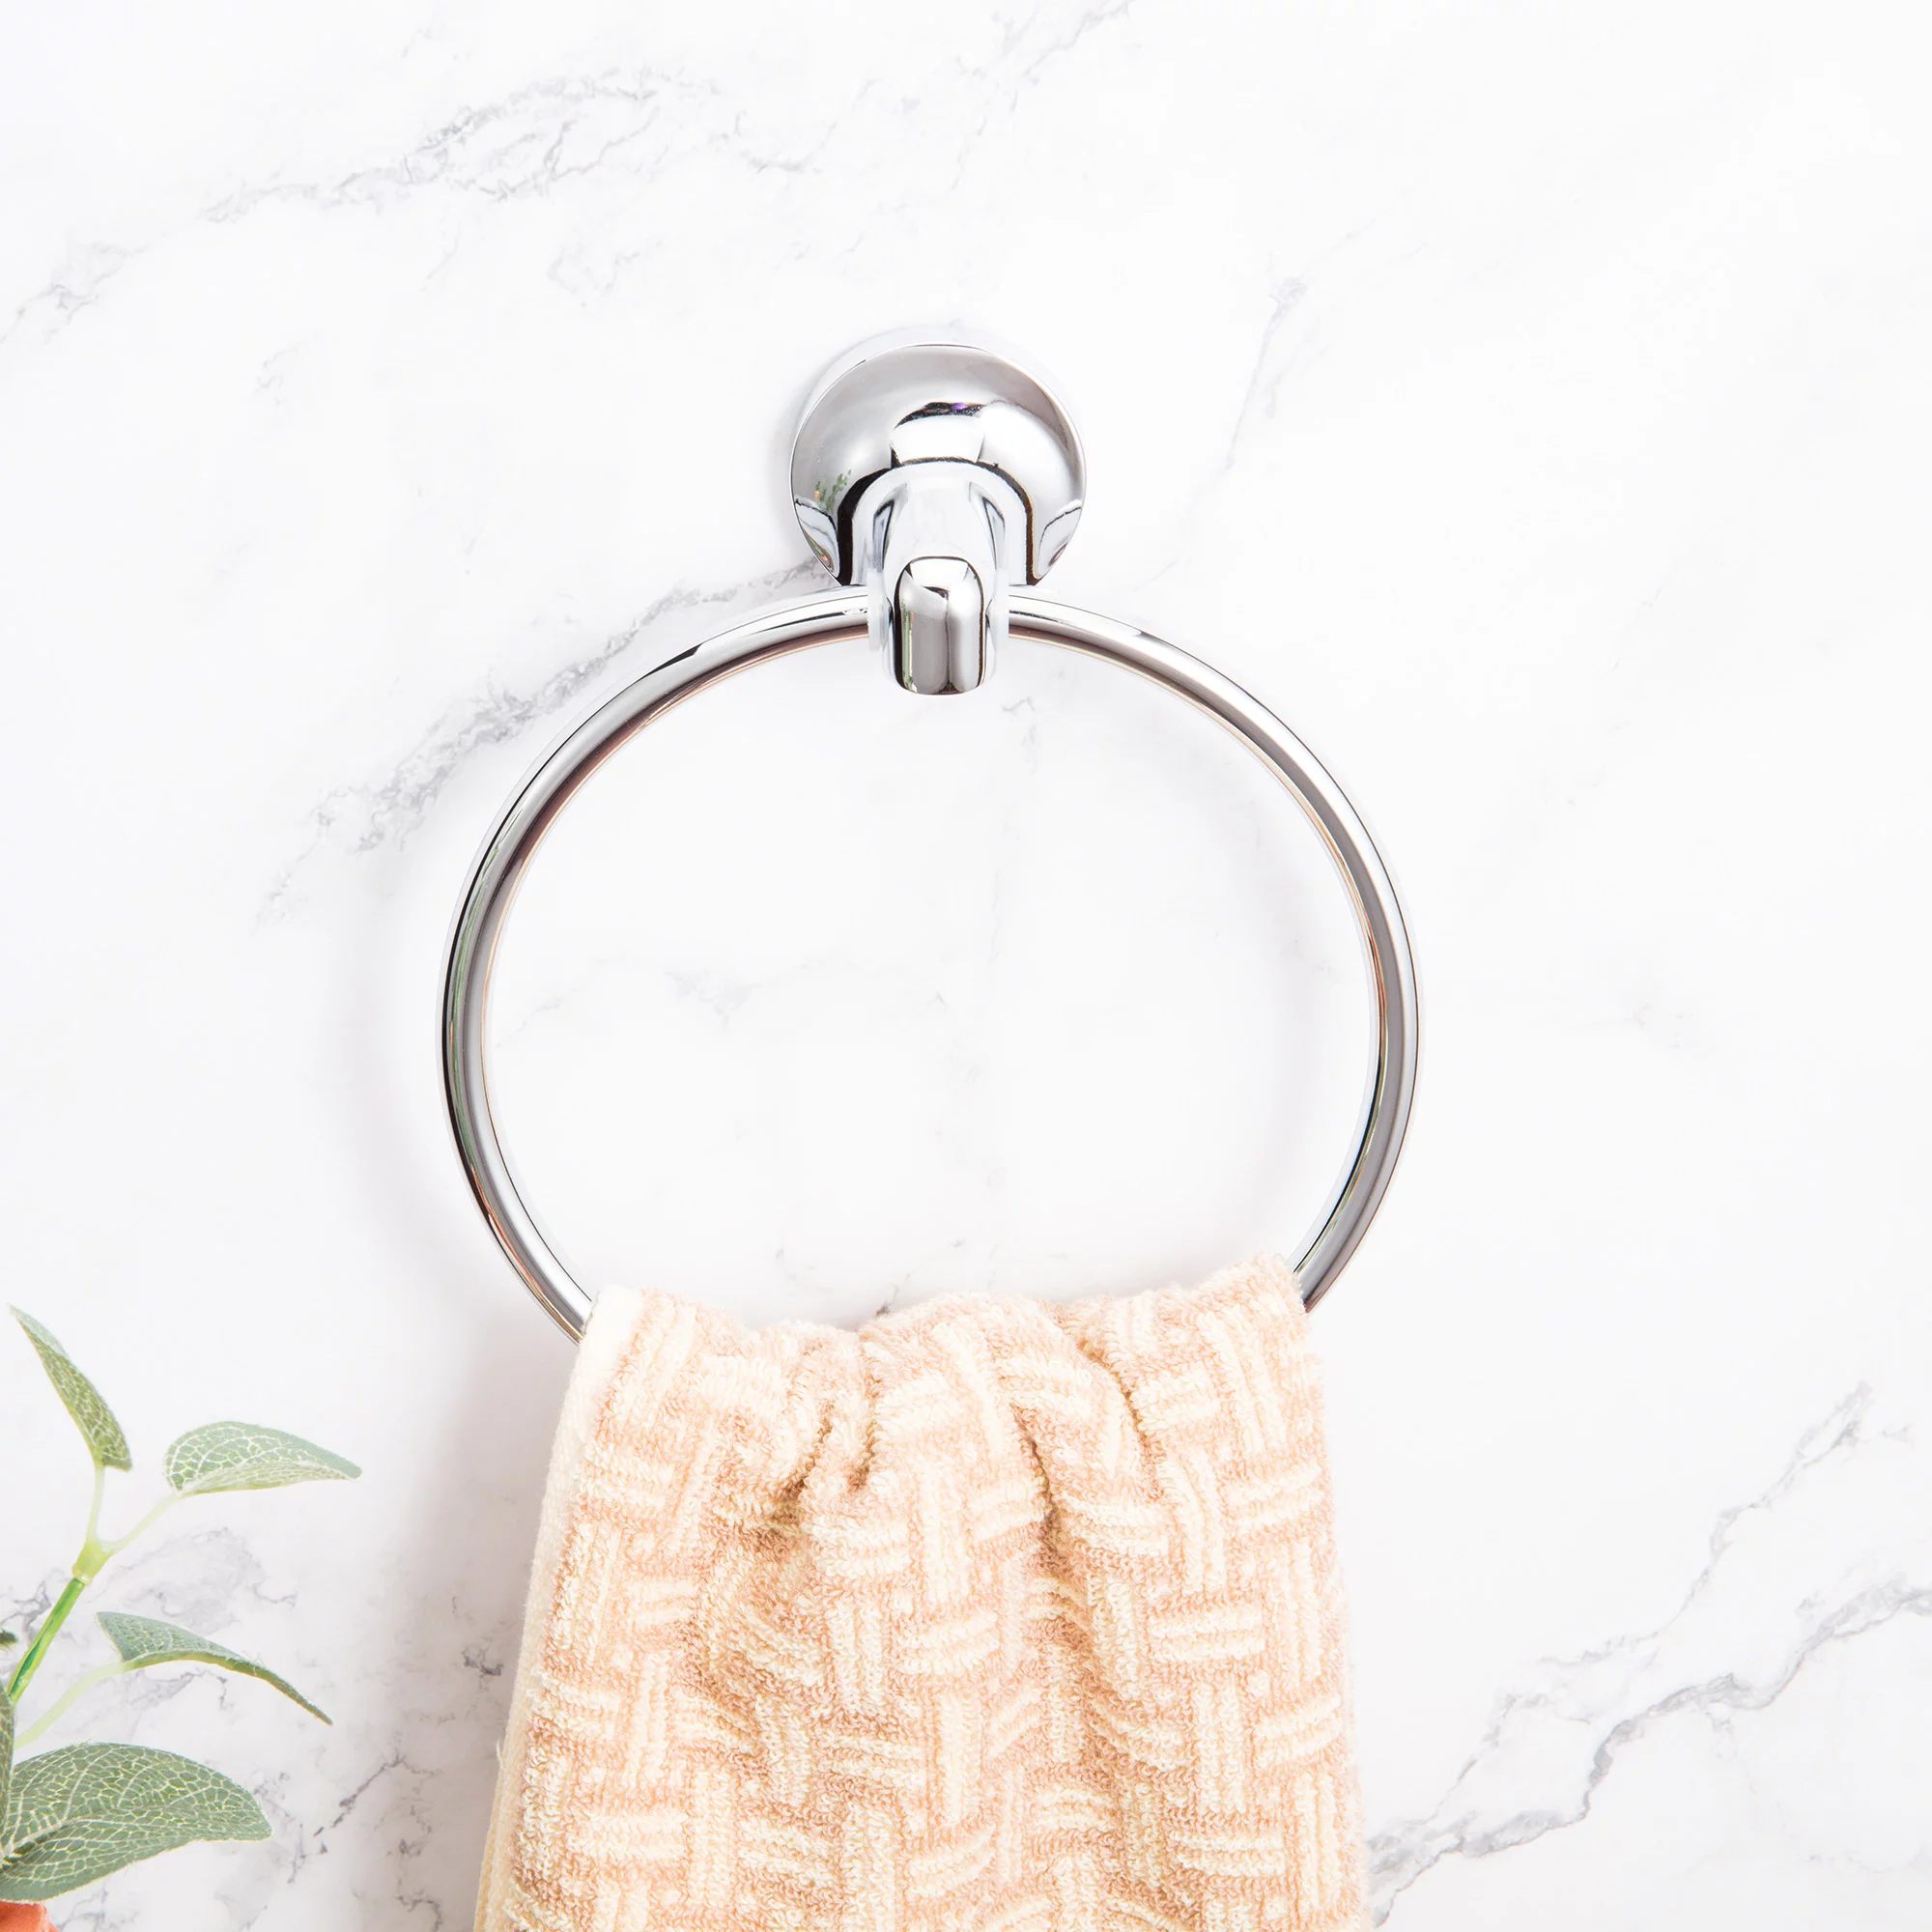 14 Amazing Hand Towel Ring for 2023